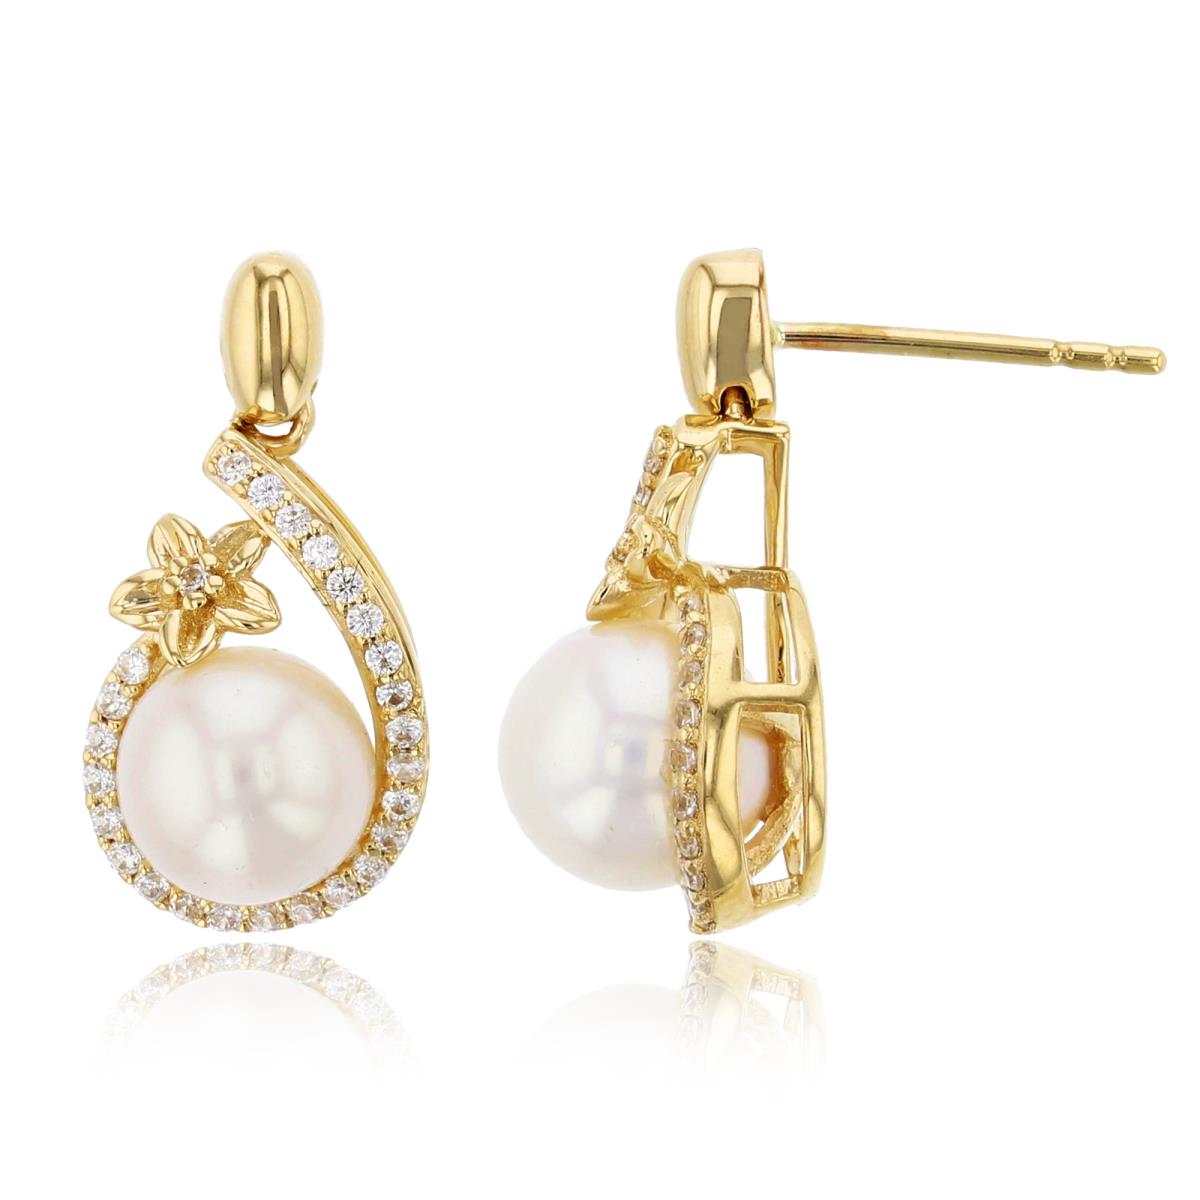 14K Yellow Gold 0.21 CTTW Rnd Diam & 7mm Rnd White Pearl with Flower PS-shape Earring